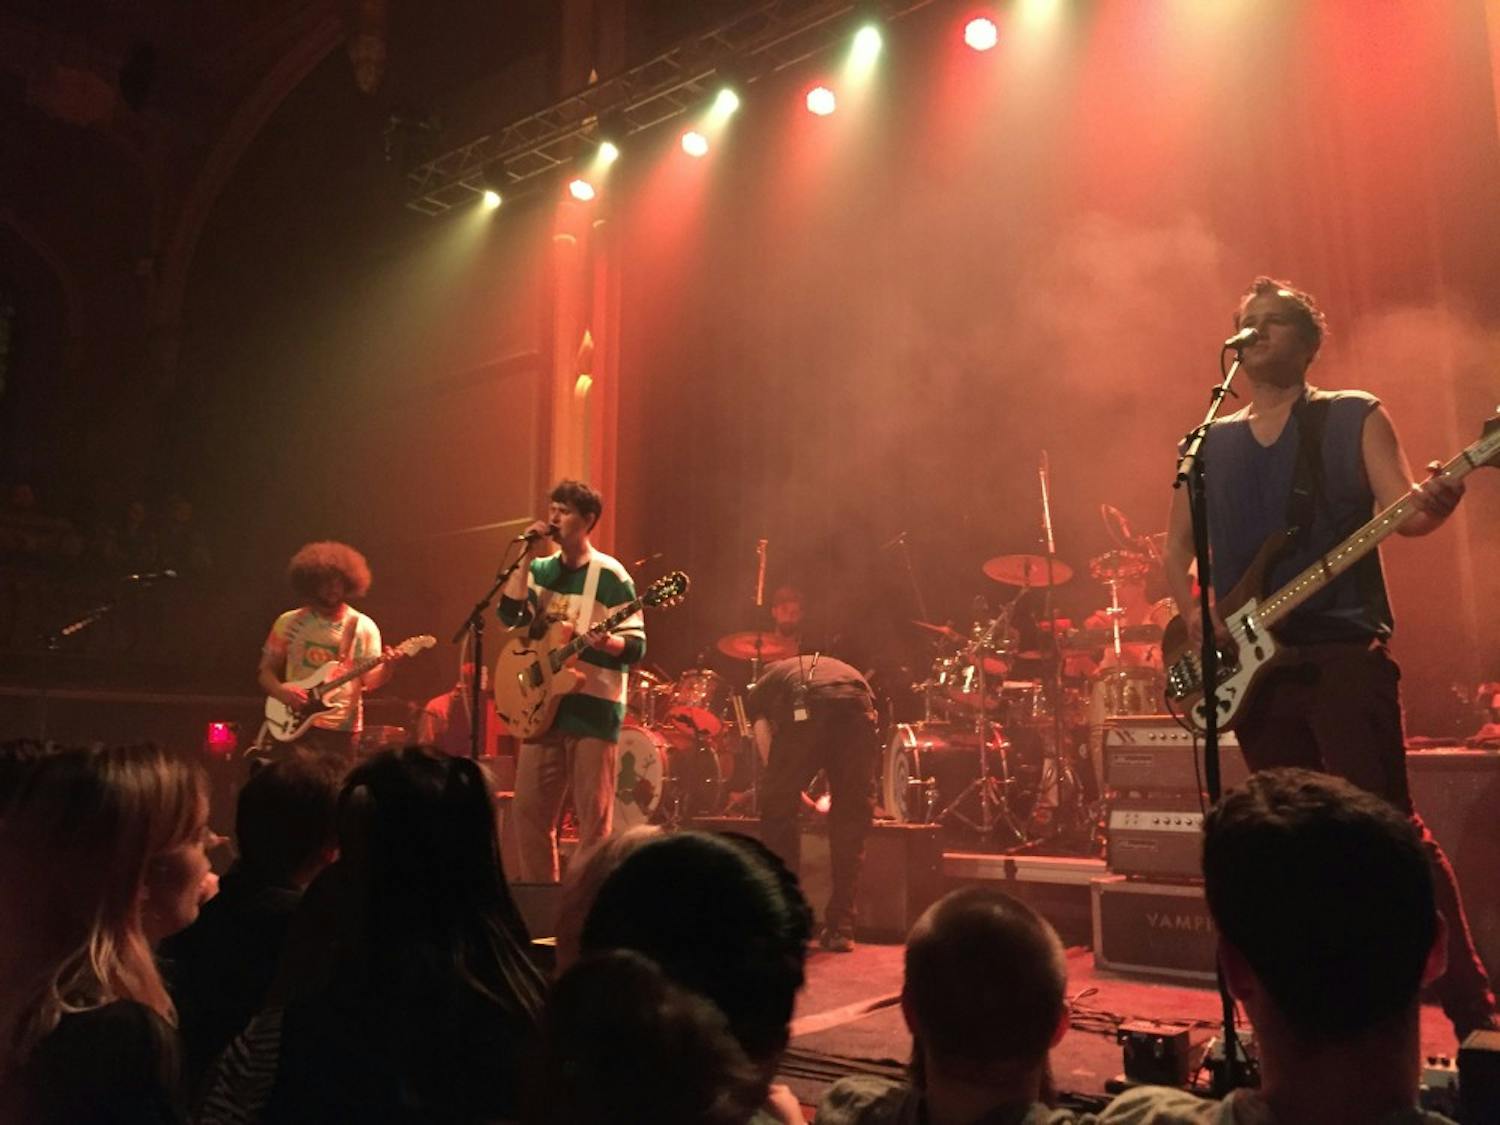 Vampire Weekend performs at Asbury Hall. The band mixed old hits with new cuts to ensure an enjoyable night.